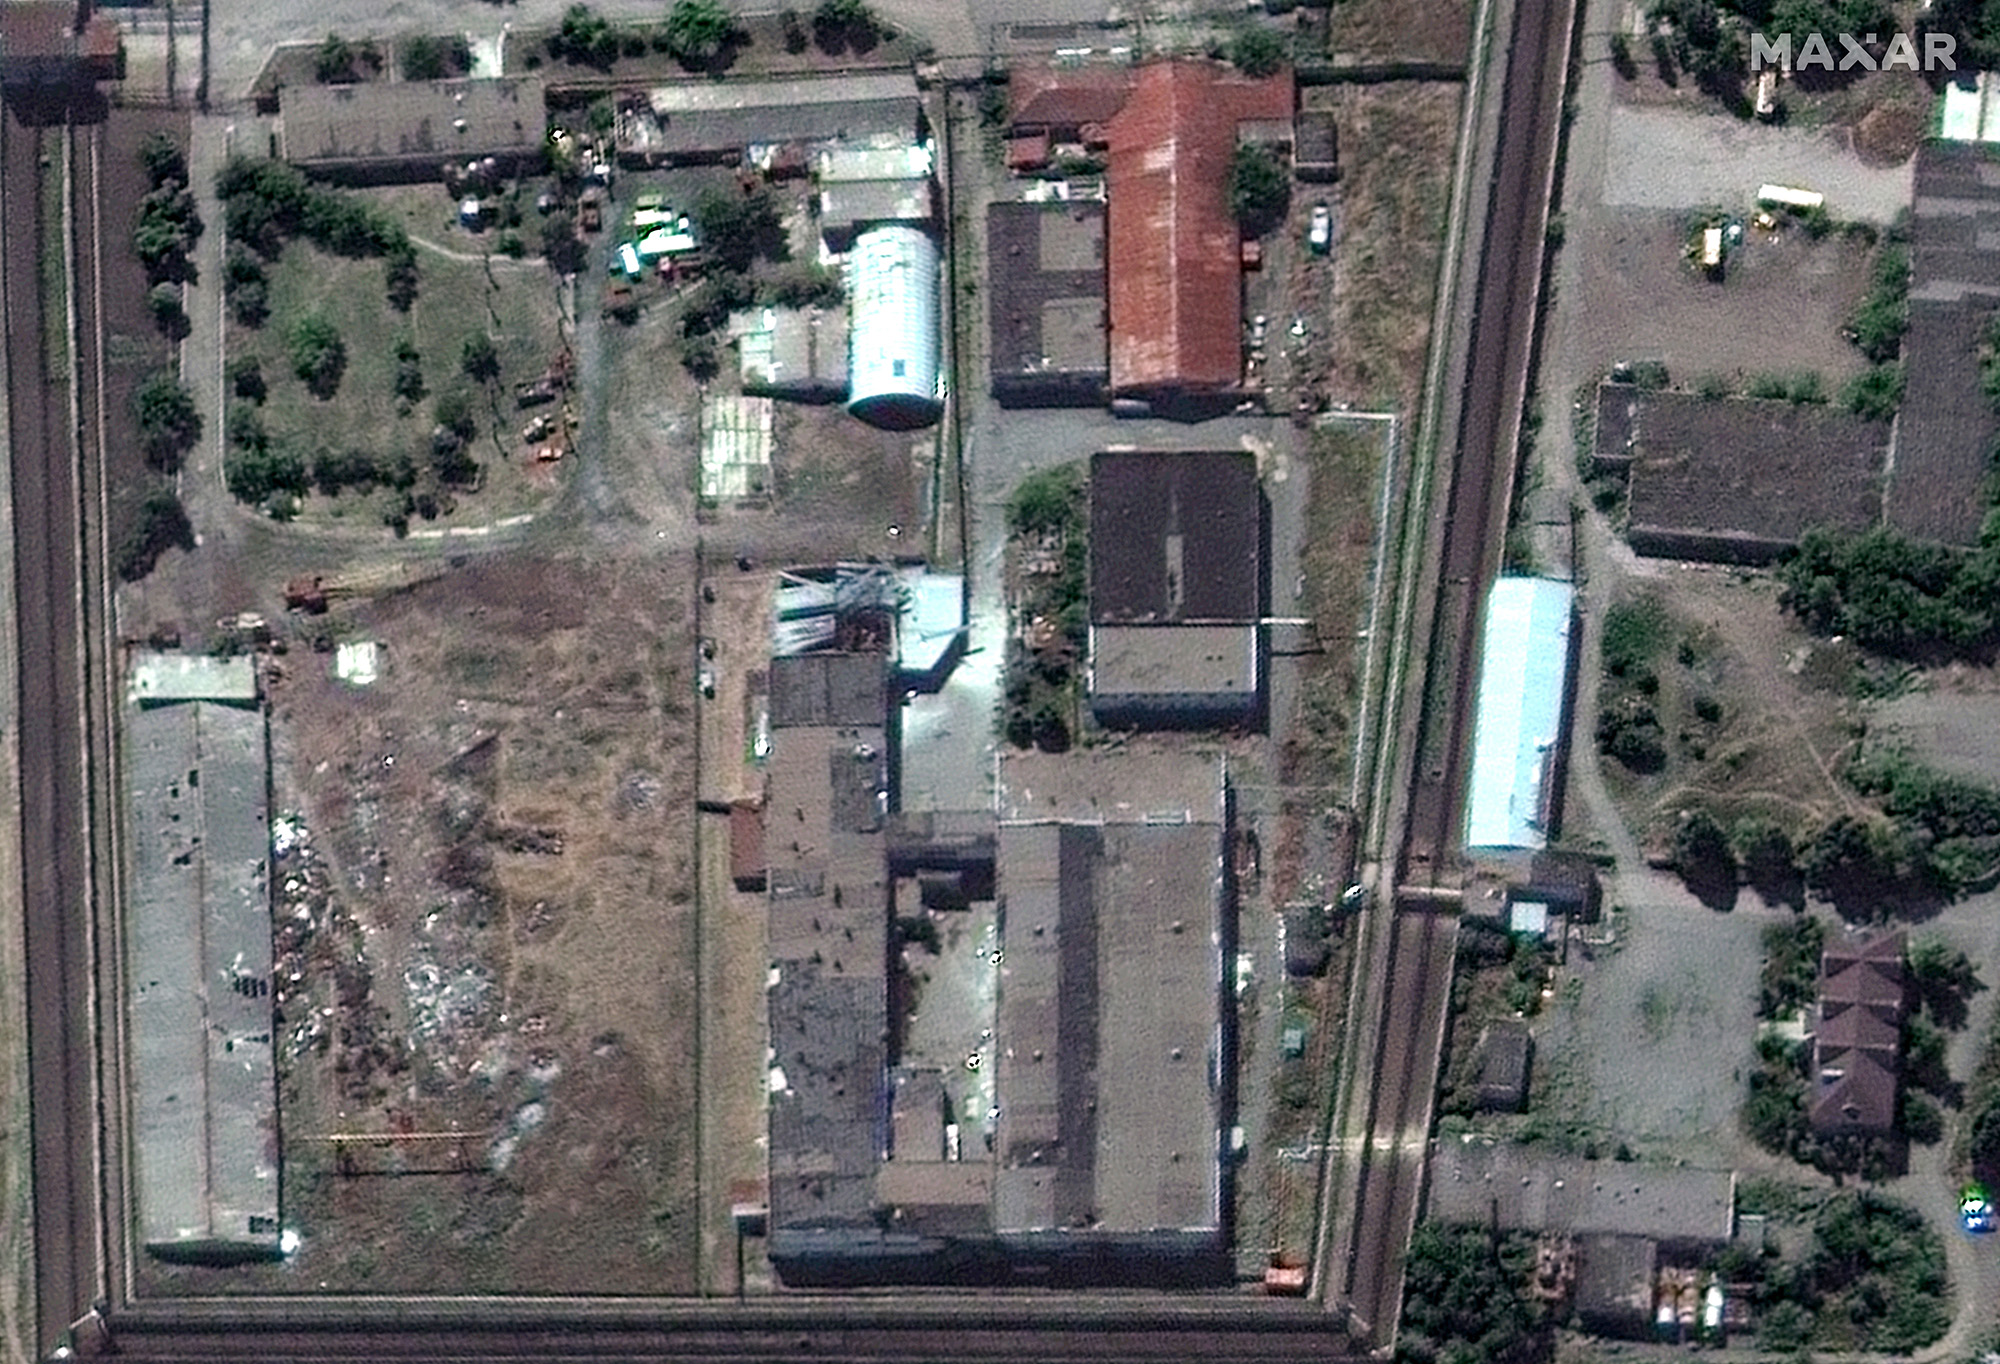 The Olenivka prison in Donetsk is seen in a satellite photo provided by Maxar Technologies on July 30, following the attack on the facility.